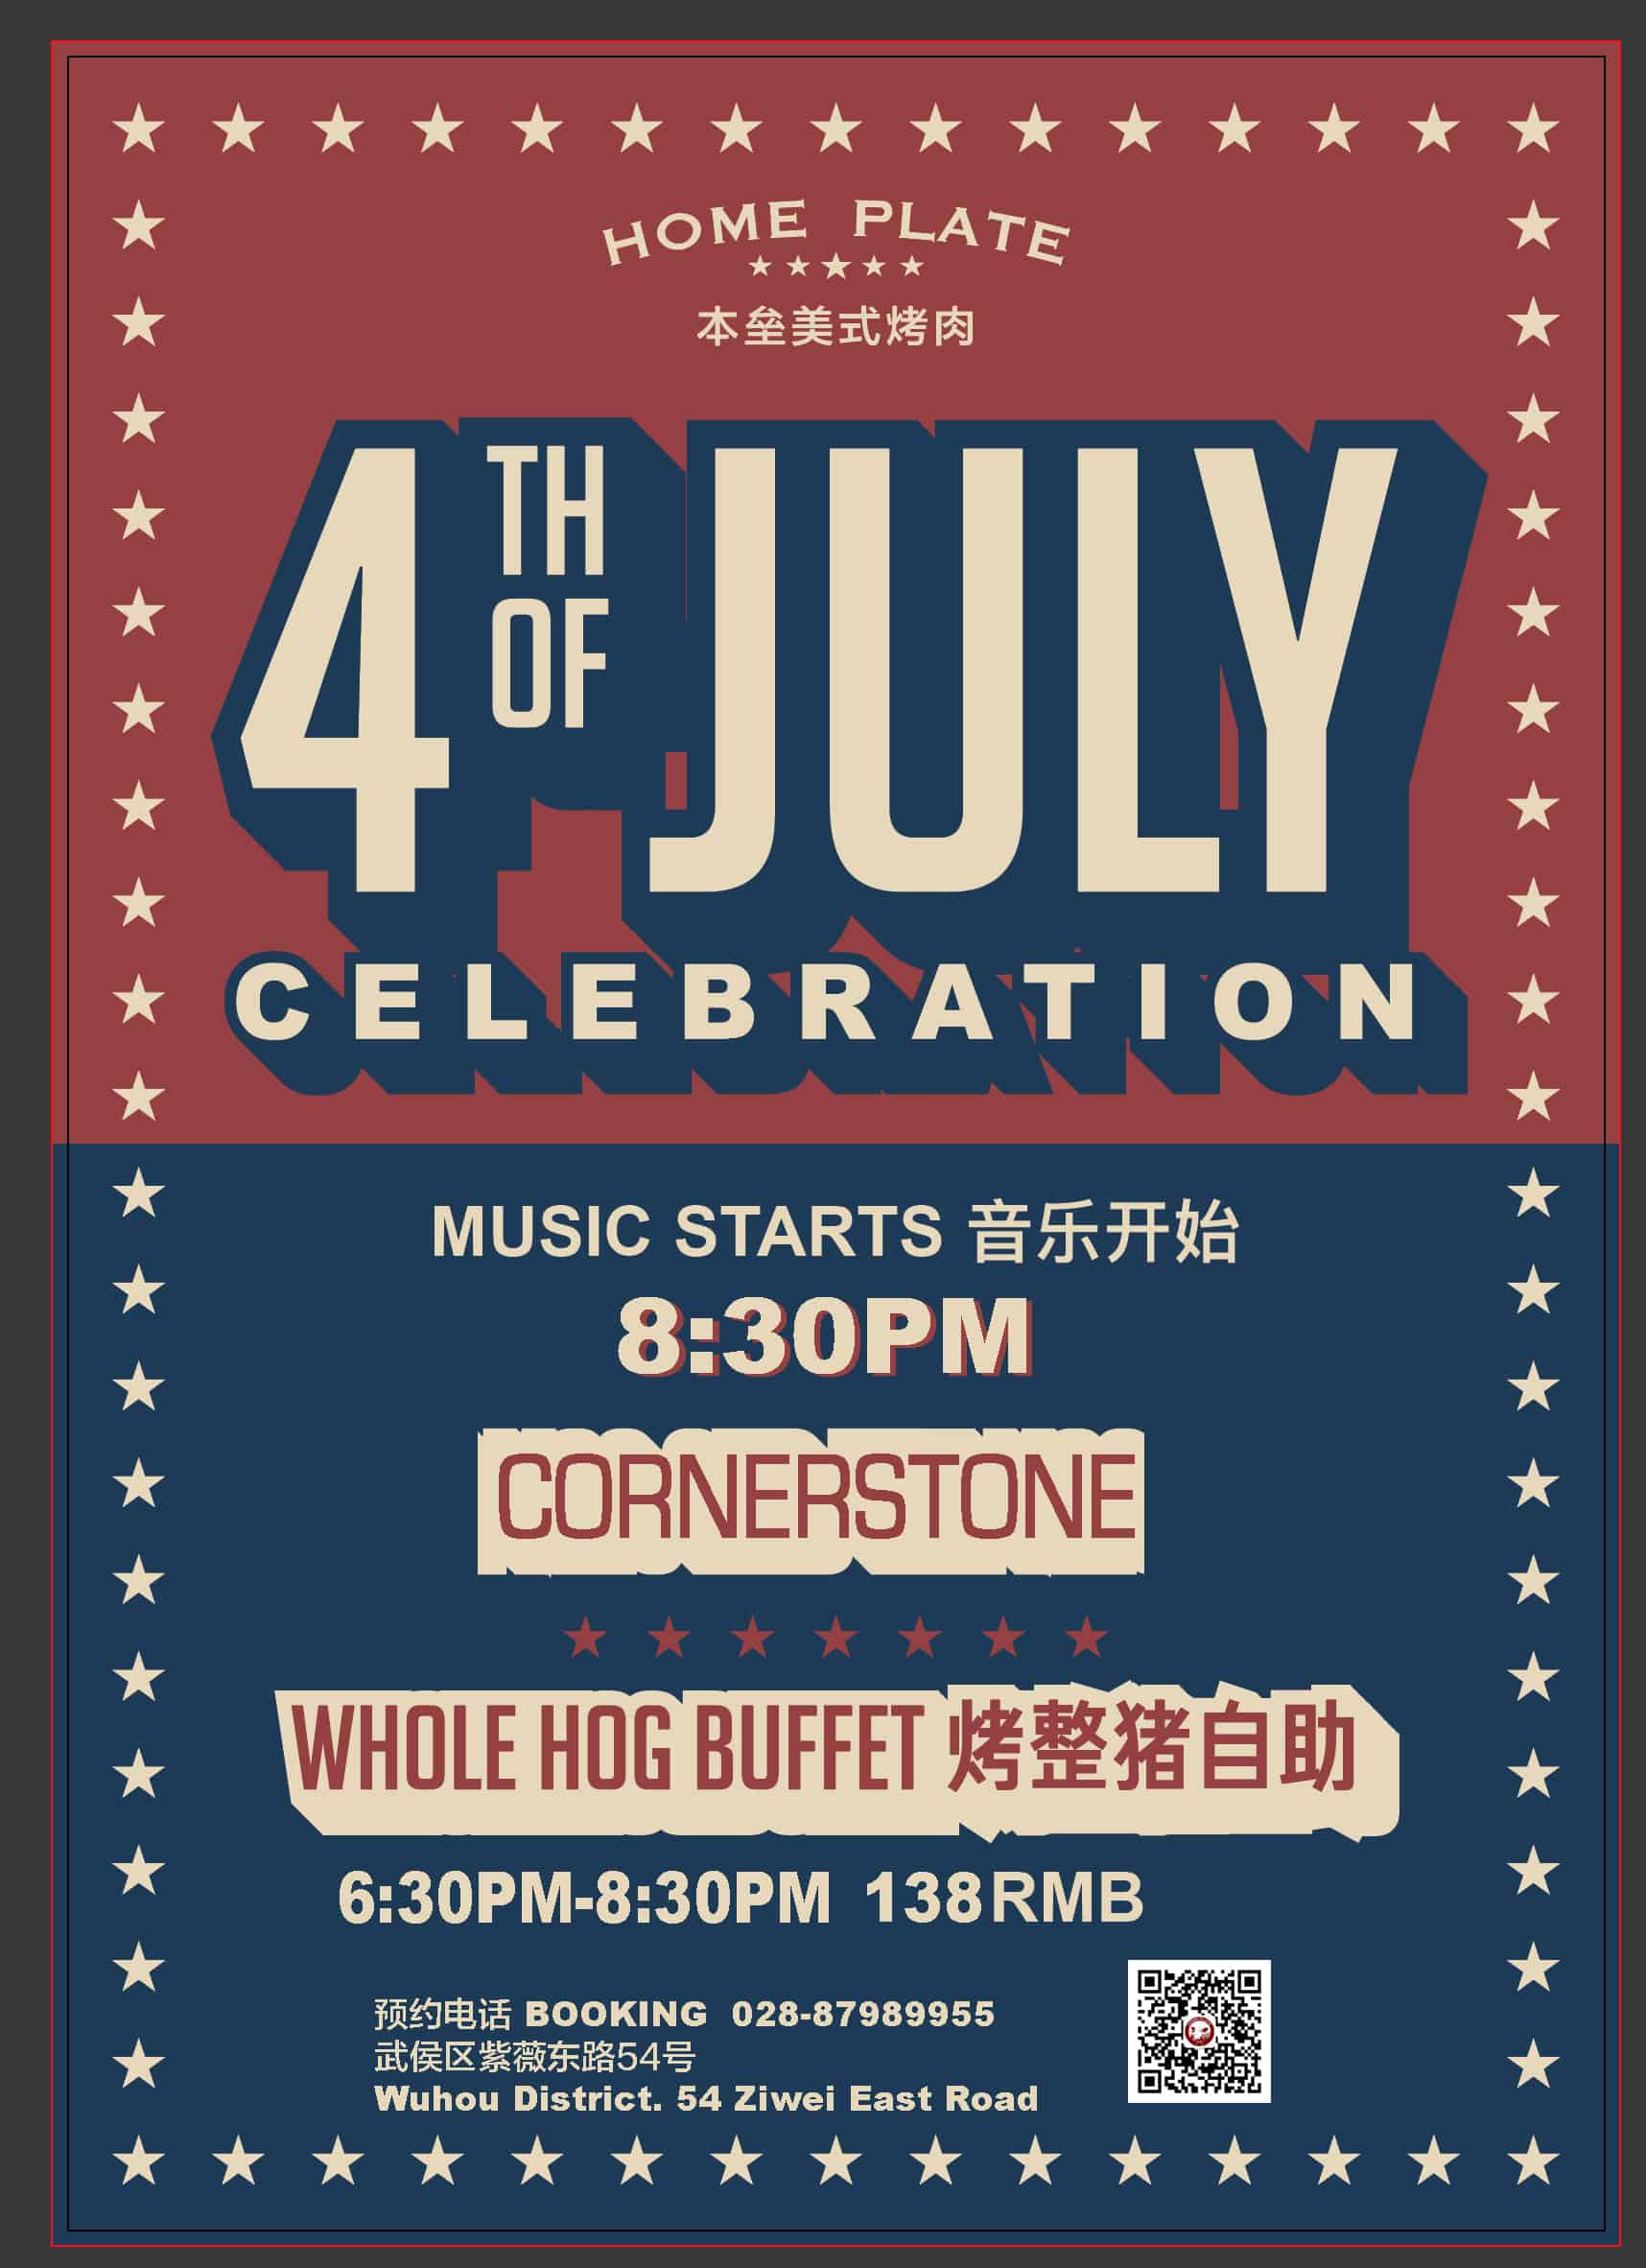 July 4 Home Plate 4th of July Party chengdu expat 1